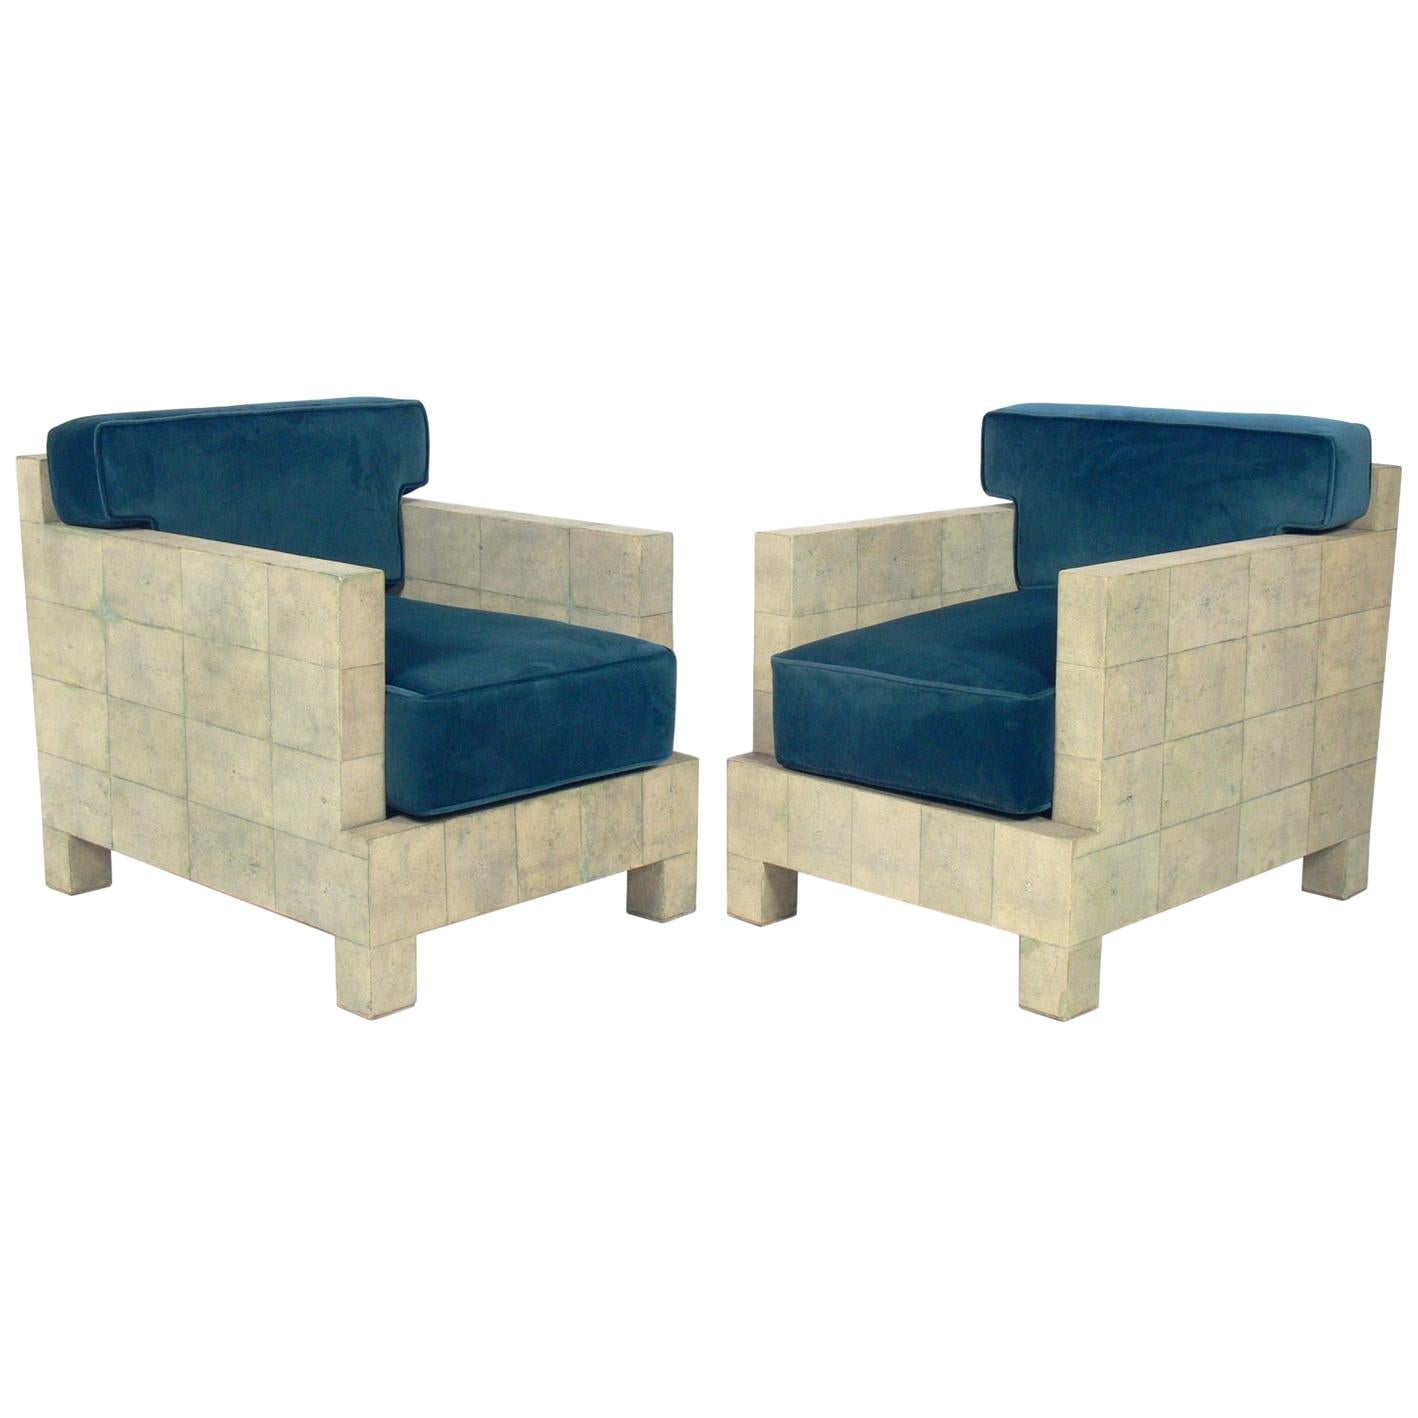 Pair of Shagreen Lounge Chairs, after a design by Jean Michel Frank 